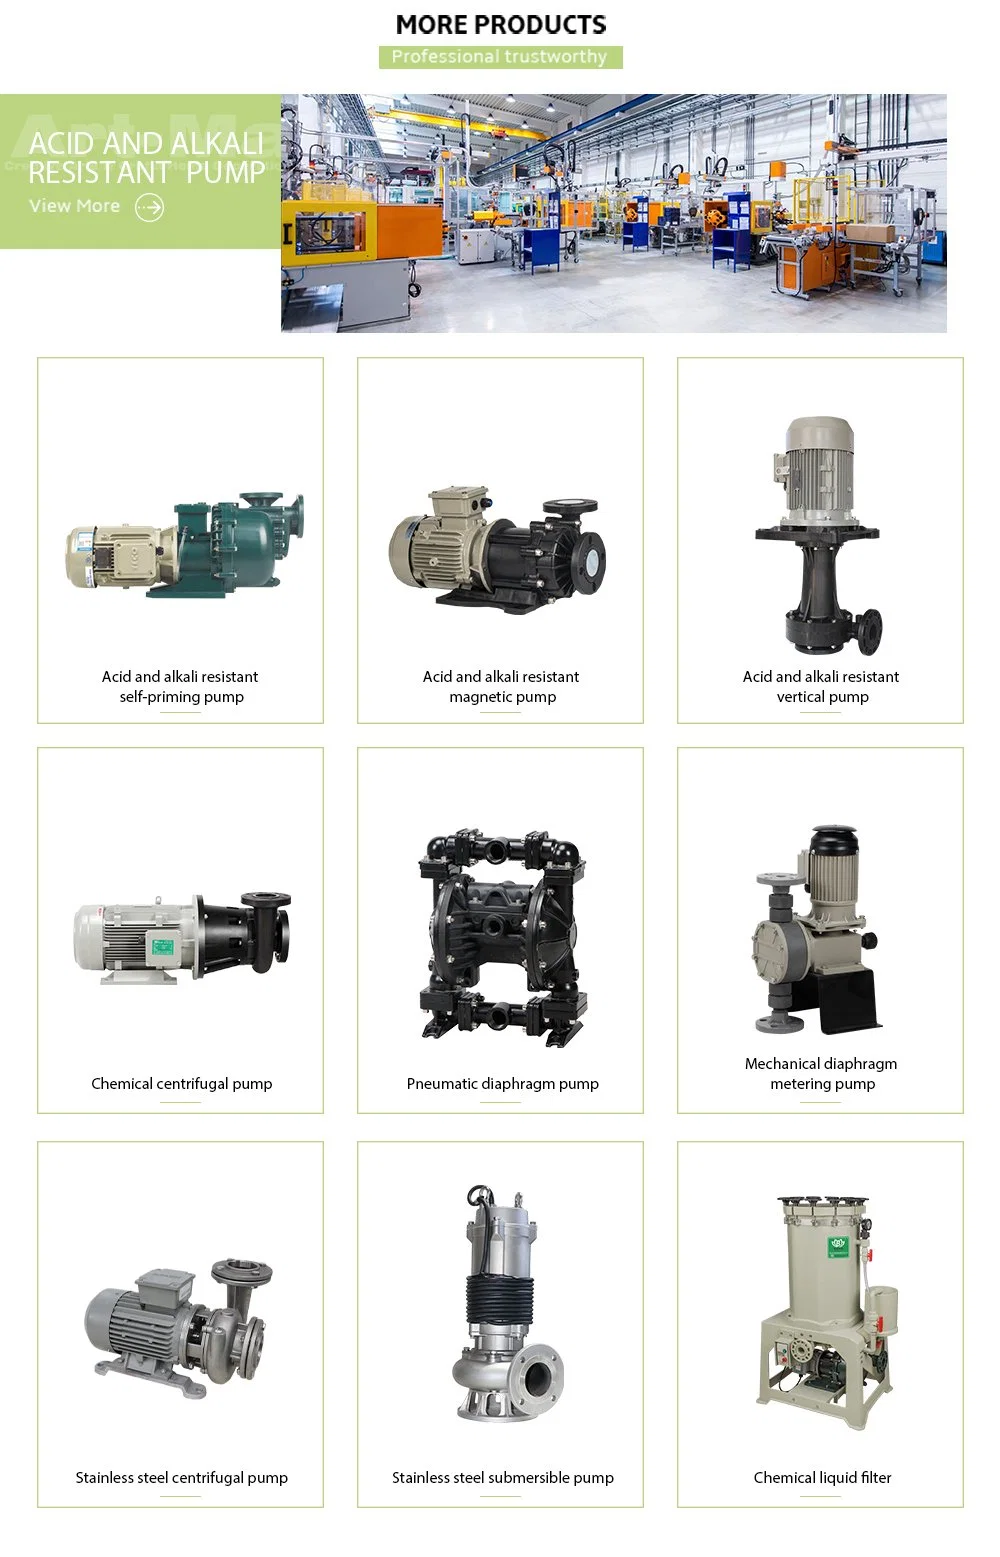 PP PVDF FRPP Vertical Chemical Centrifugal Pump for Electroplating Electrophoresis and Etching